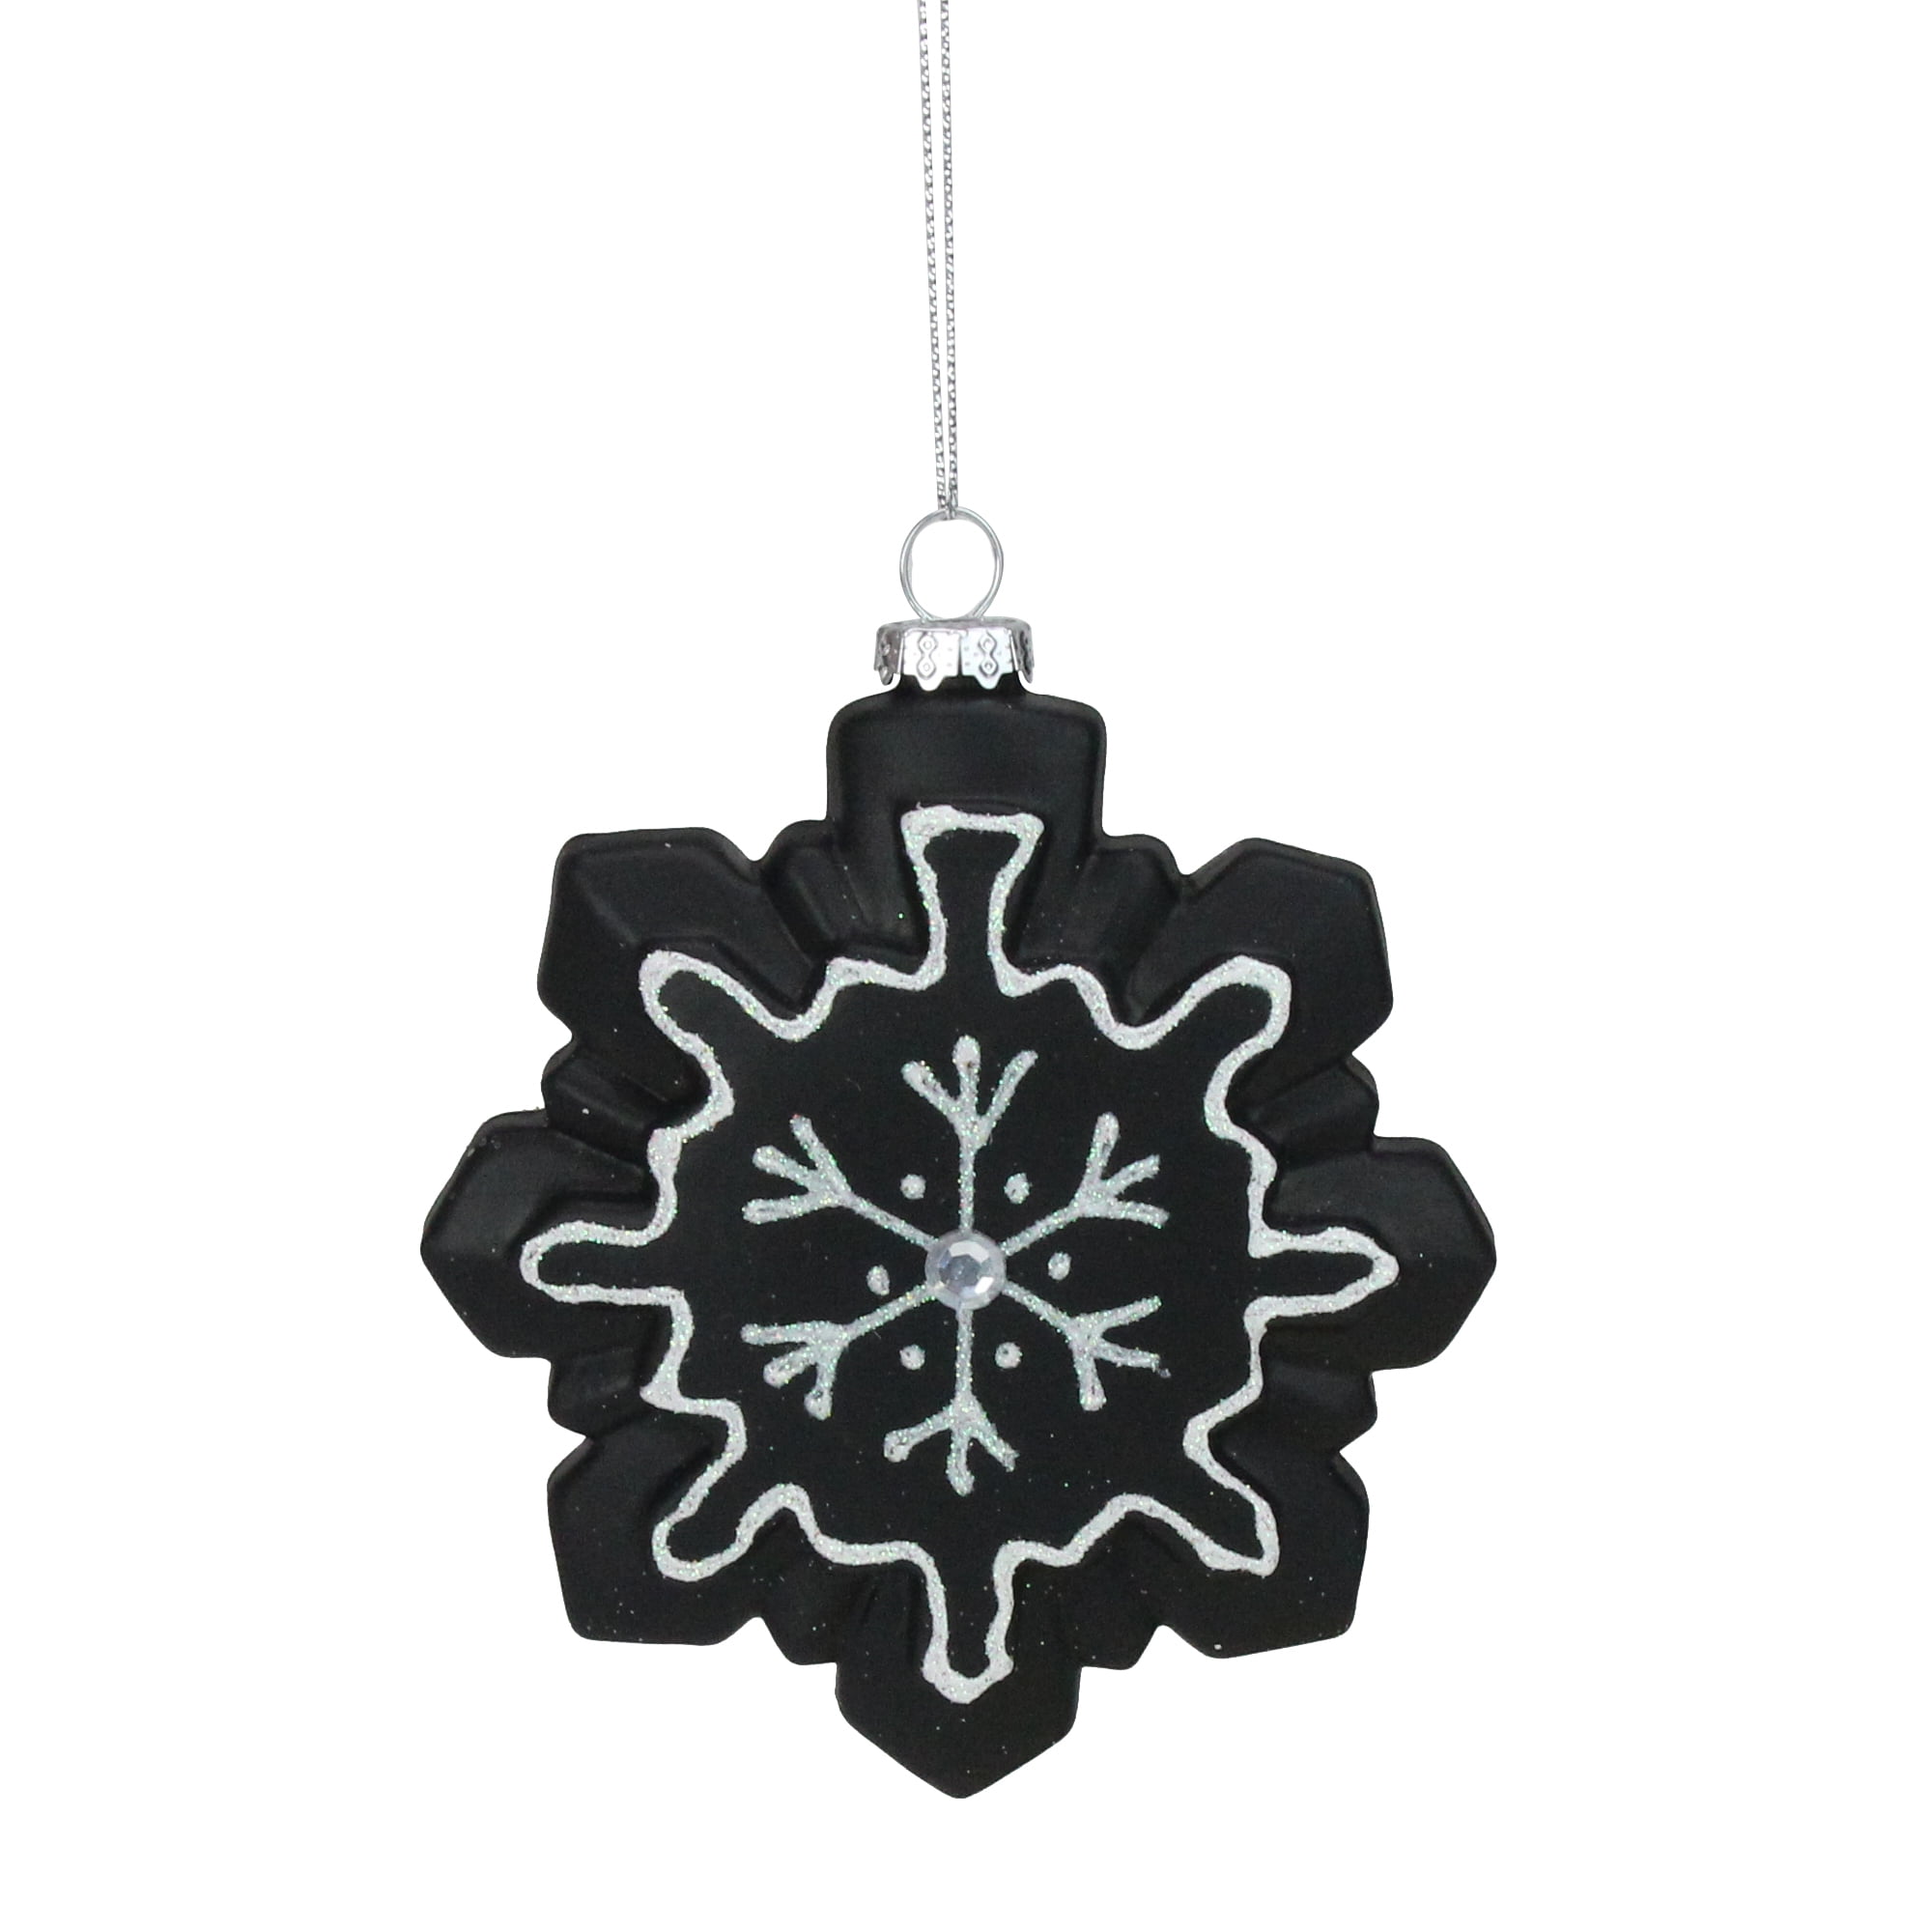 Details about   Nice New Kurt Adler 5.5" Mountain Xmas Brown 3D Snowflake Christmas Ornament A 